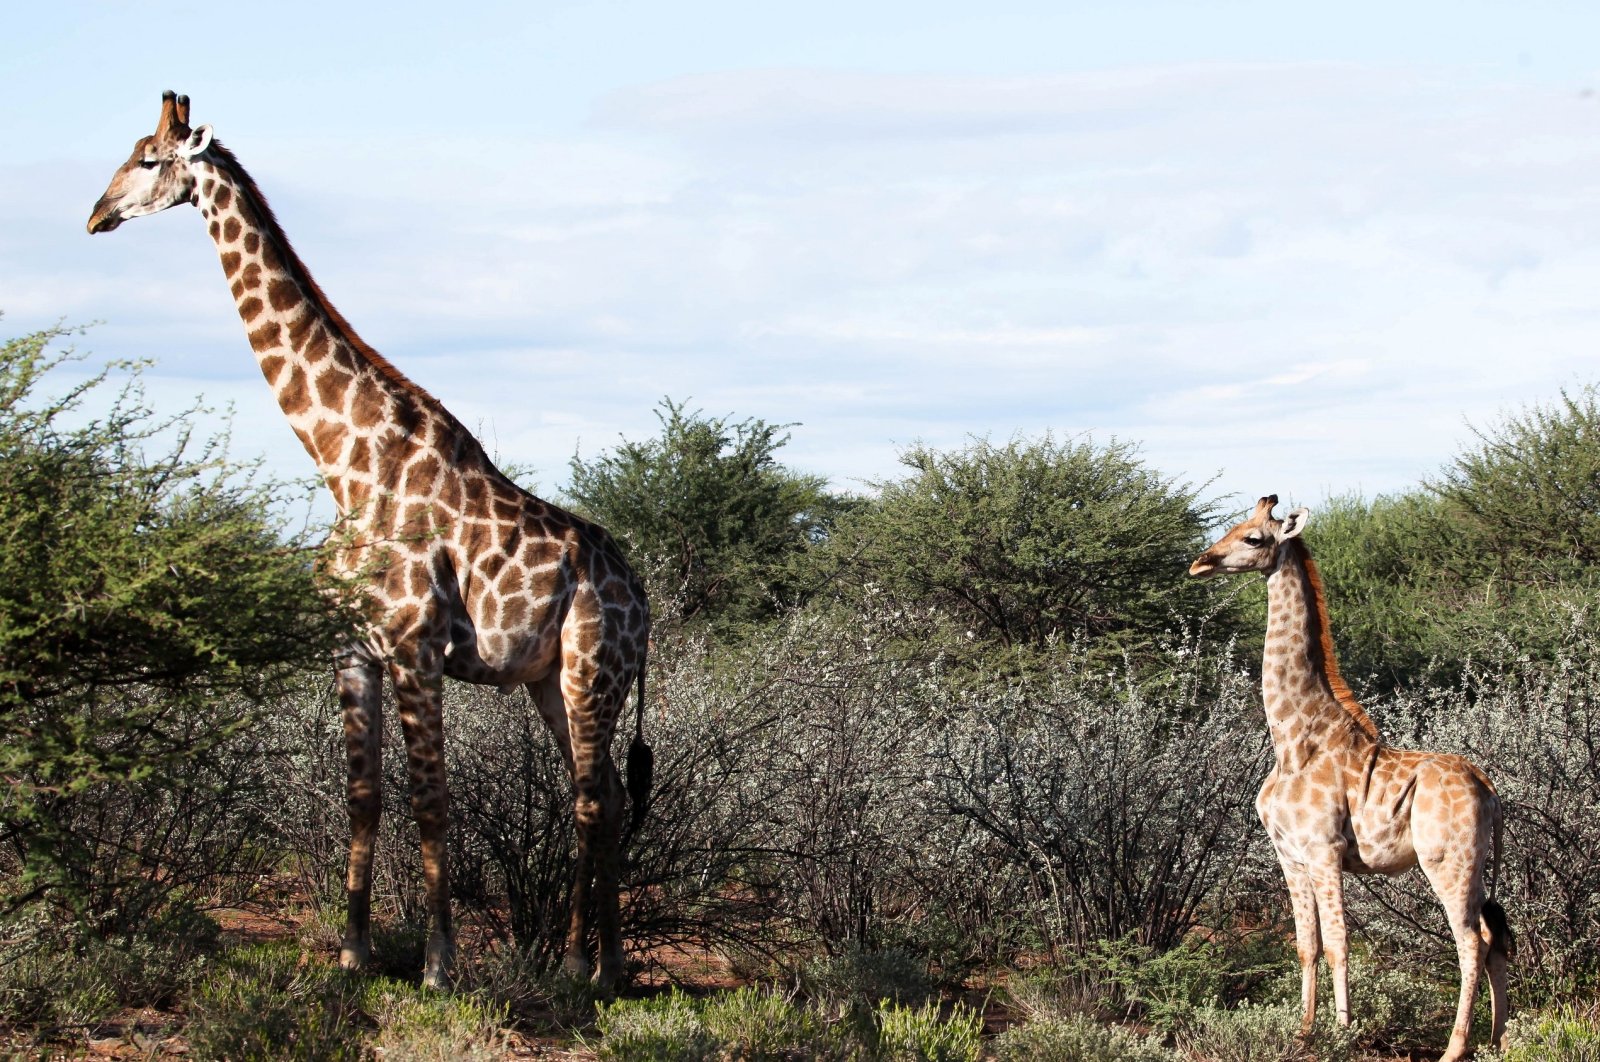 A dwarf giraffe named "Nigel," born in 2014 stands with an adult male giraffe at an undisclosed location in Namibia, March 26, 2018. (Reuters Photo)